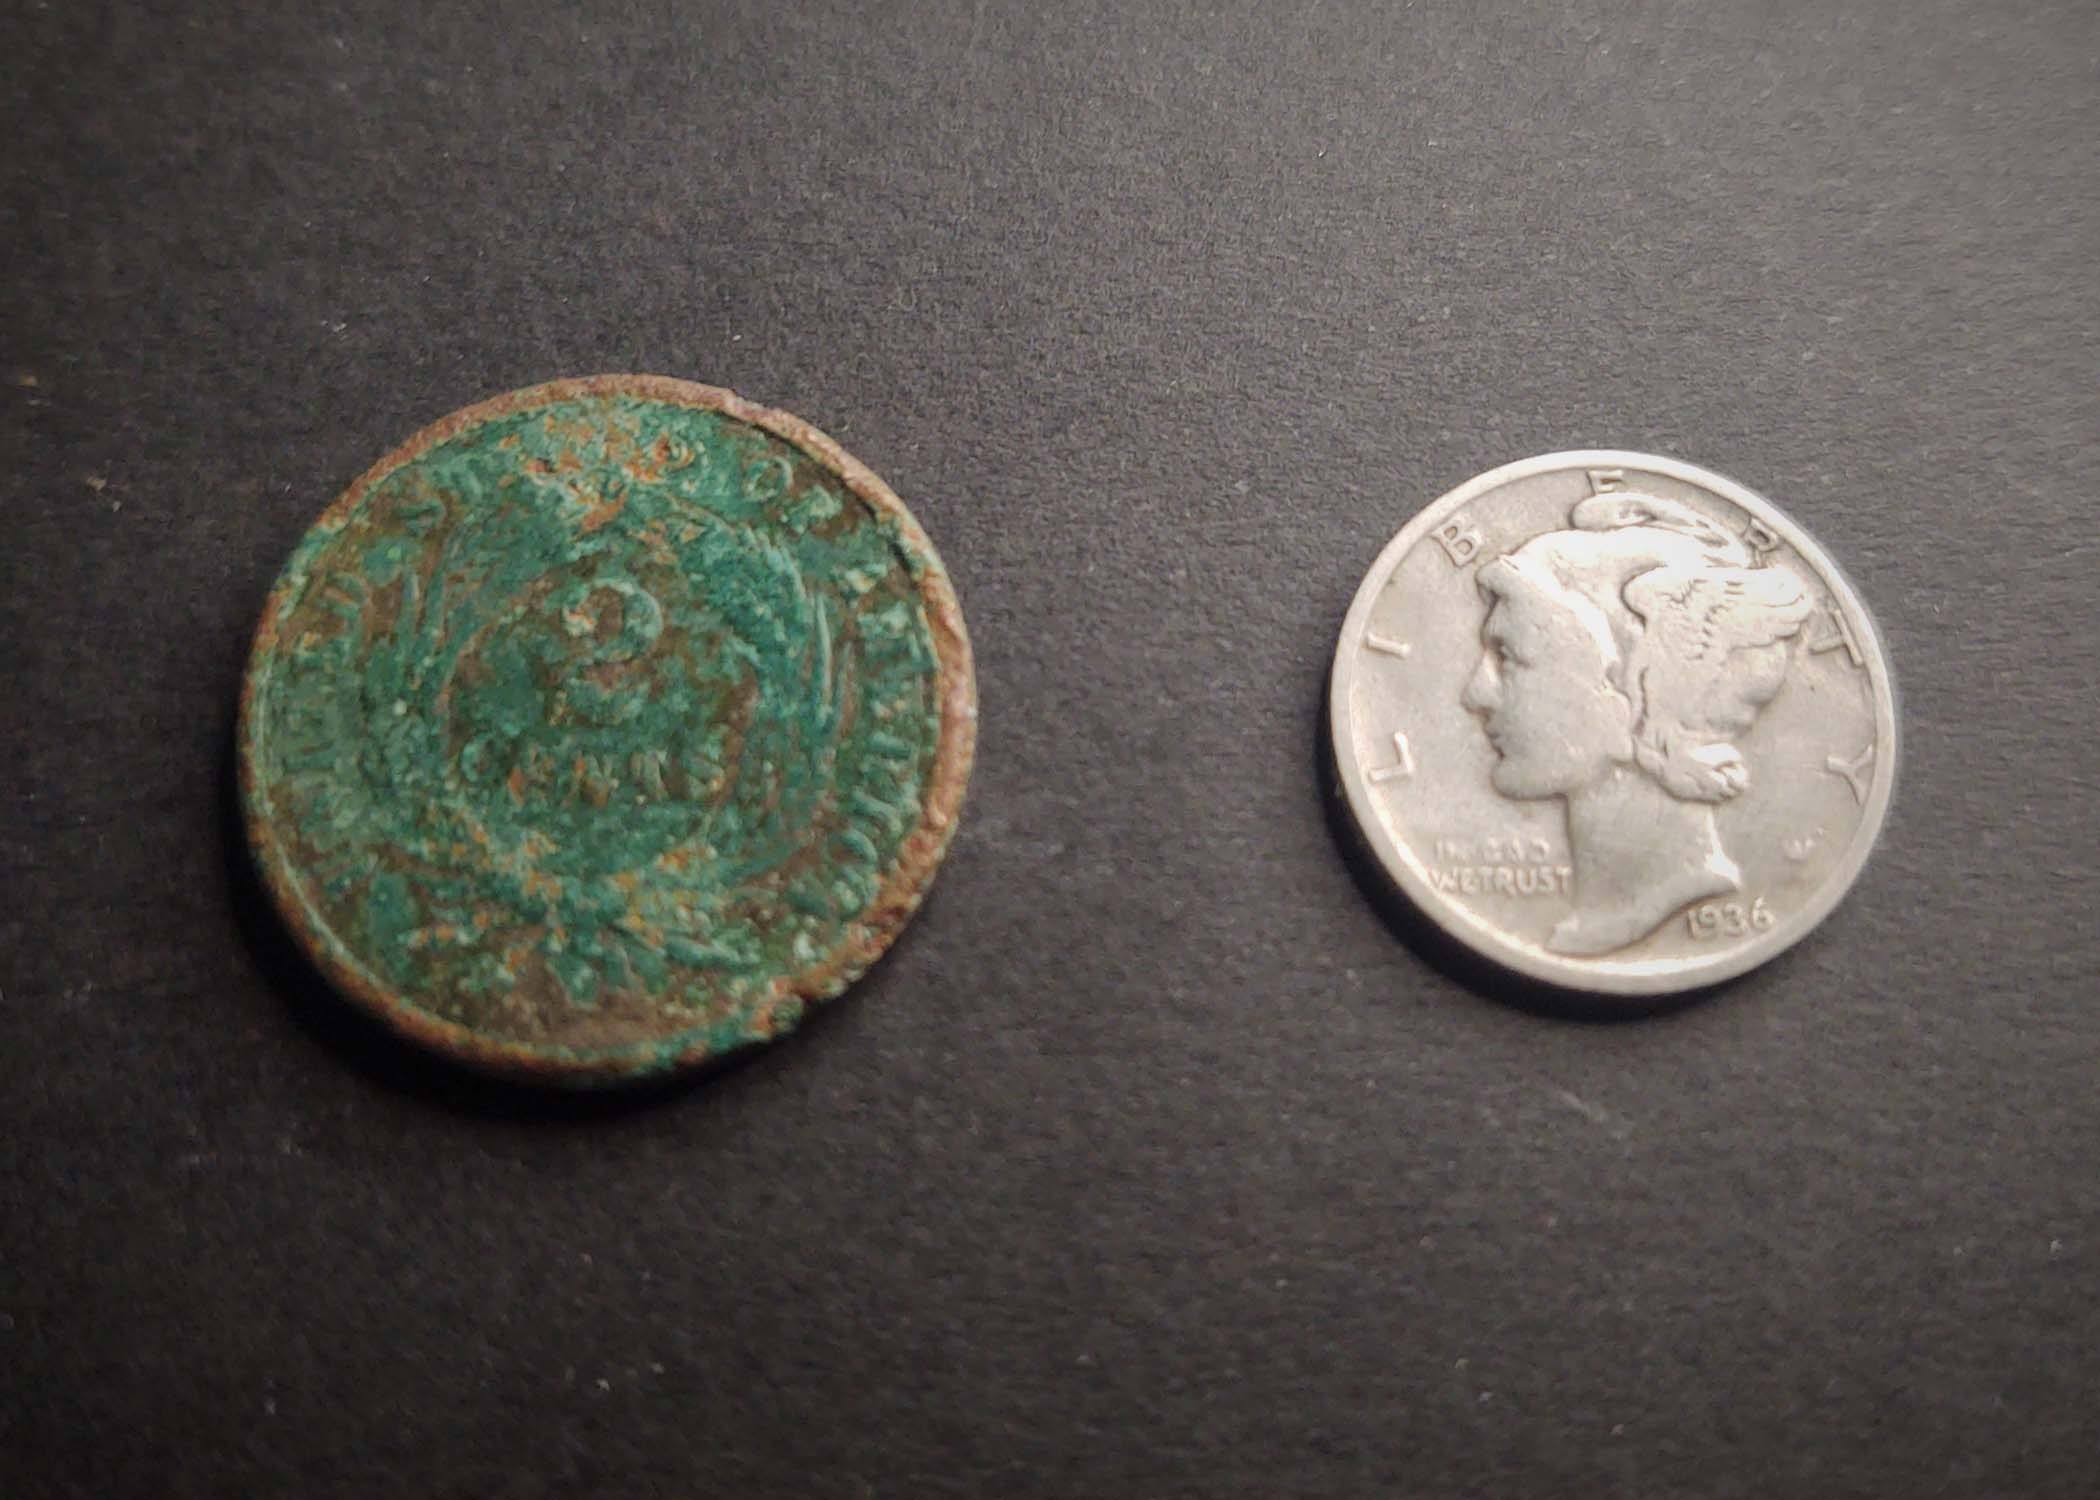 Silver and Copper Coin Finds Metal Detecting in Kansas